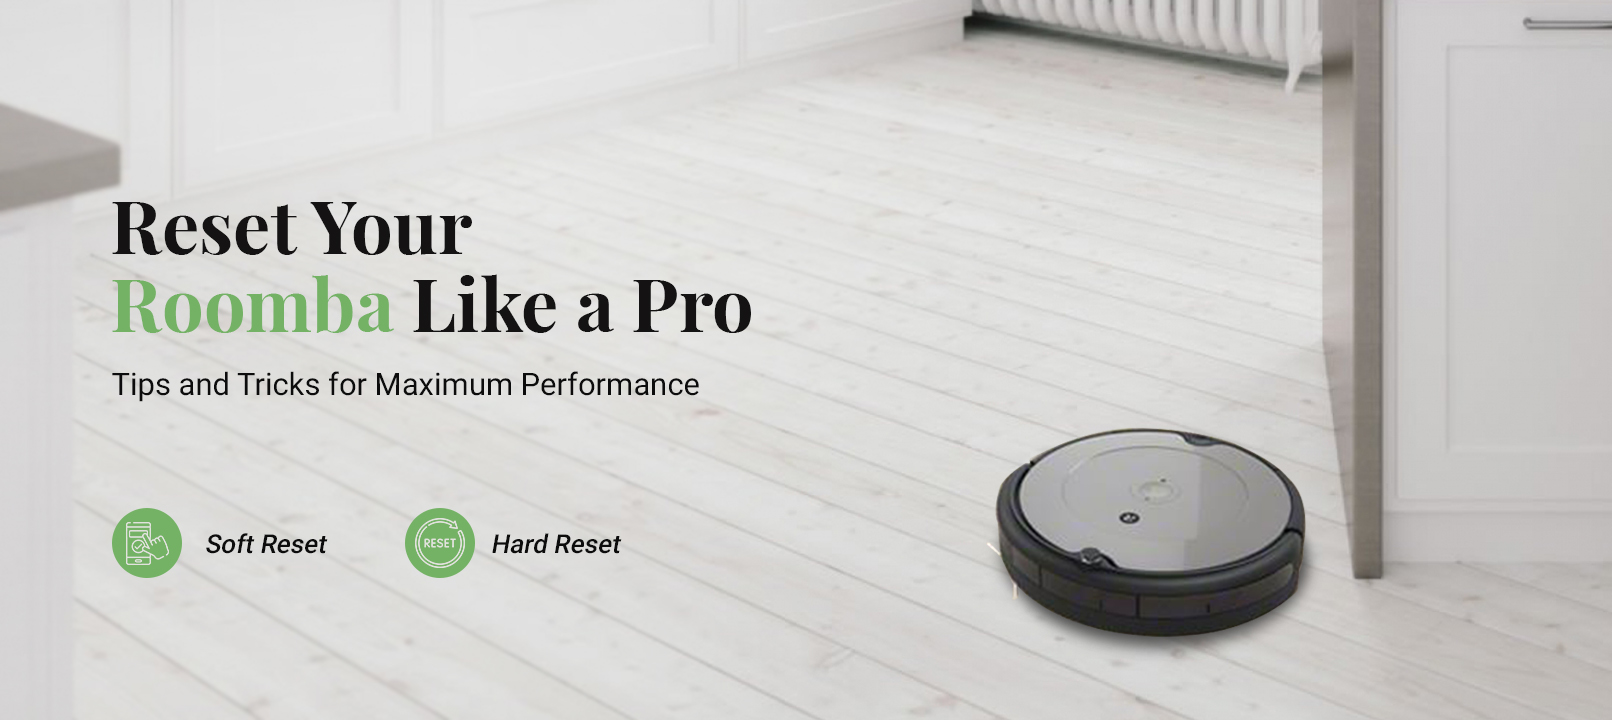 How to Reset Roomba